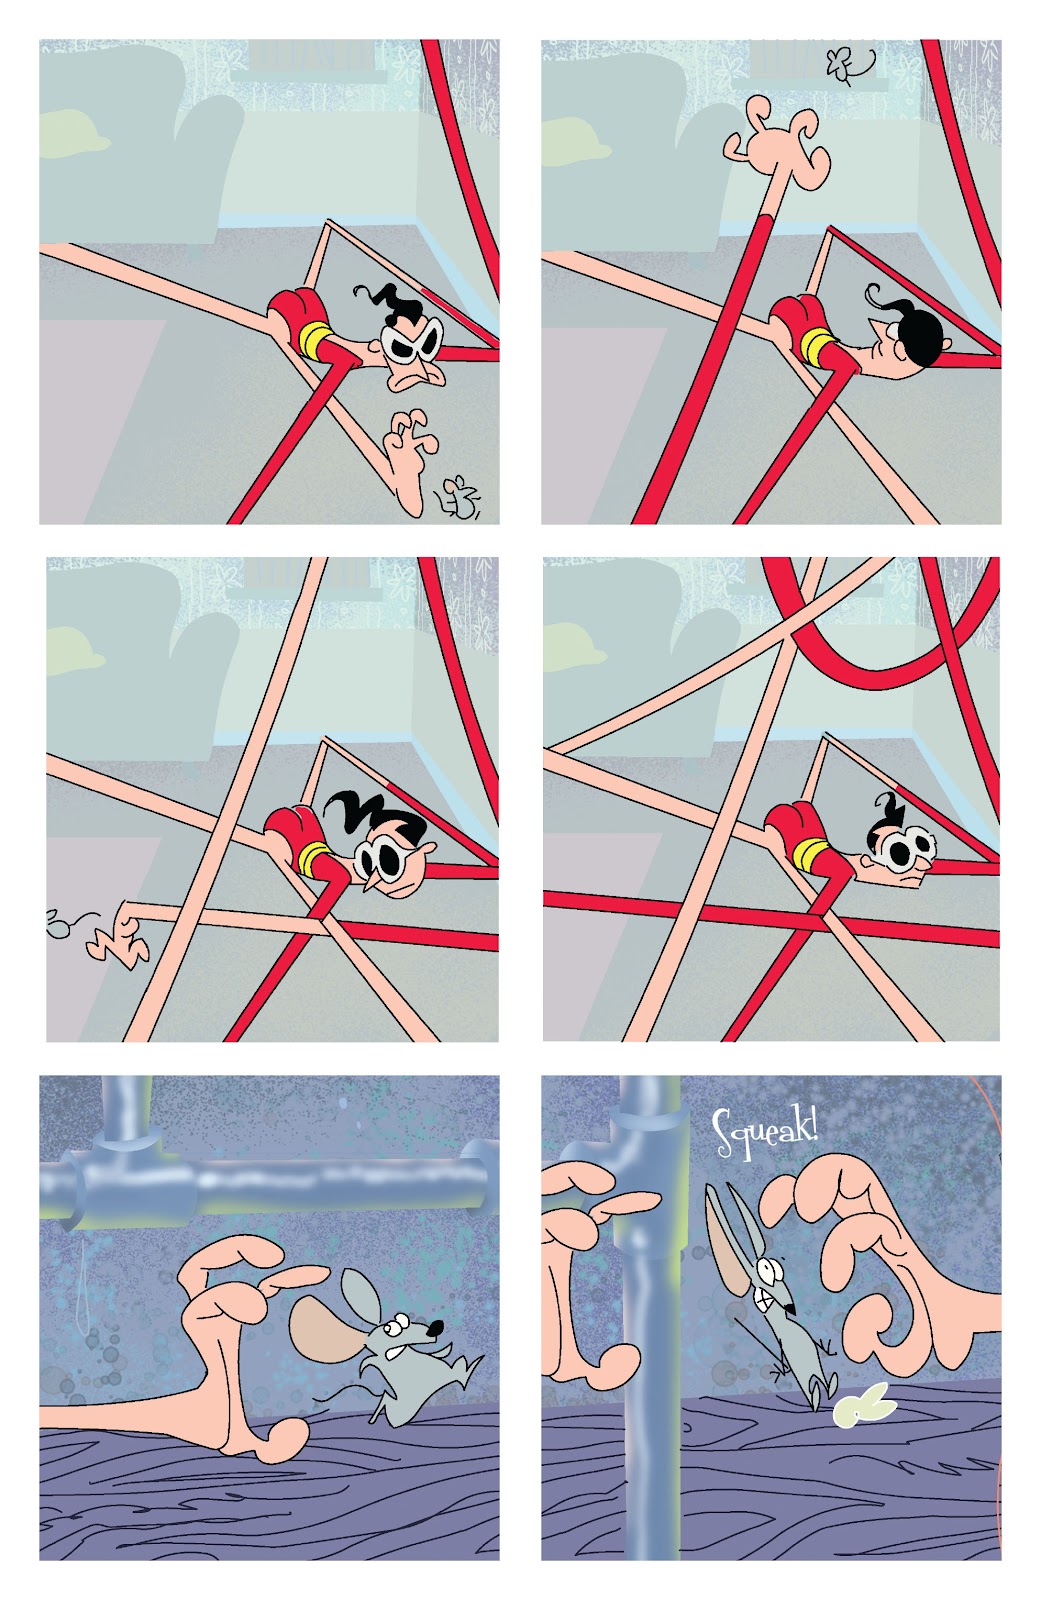 Plastic Man (2004) issue 14 - Page 13